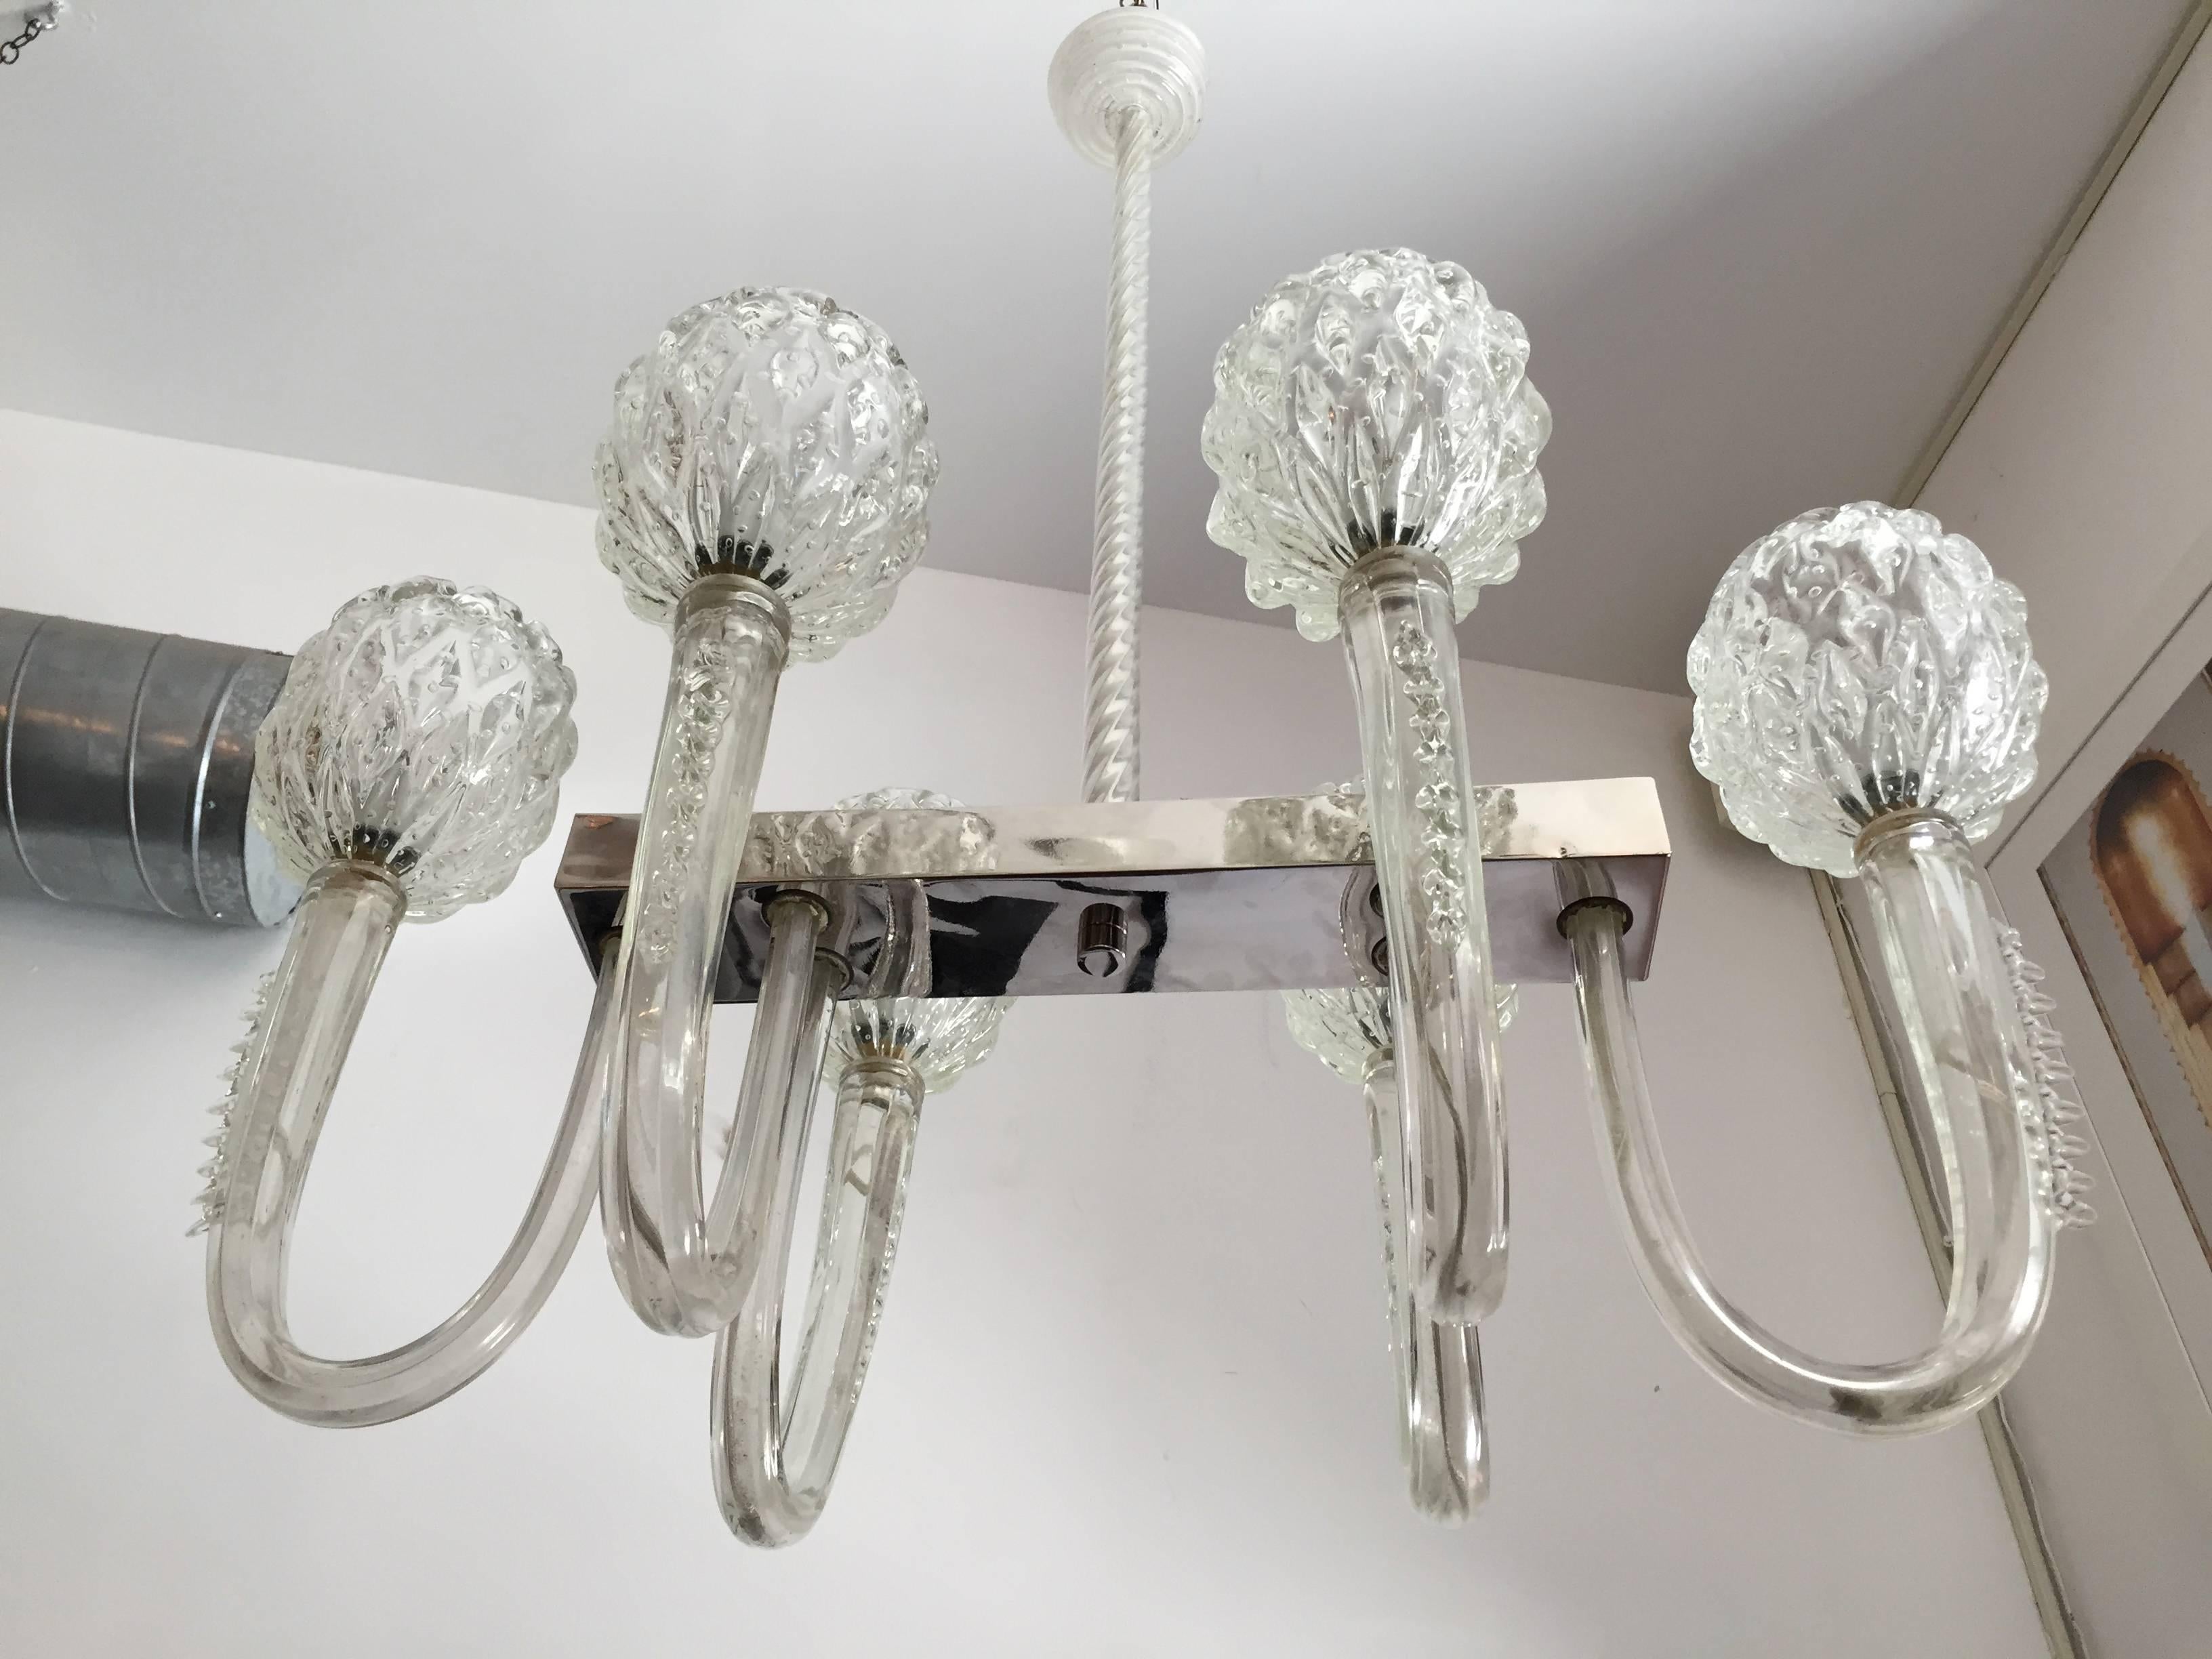 An elegant 1940s Italian Murano glass chandelier composed of a polished nickel body and thick handblown Venetian clear glass arms and shades by Barovier and Toso. Each of the arms weigh over ten pounds. A rare Murano chandelier of this exceptional